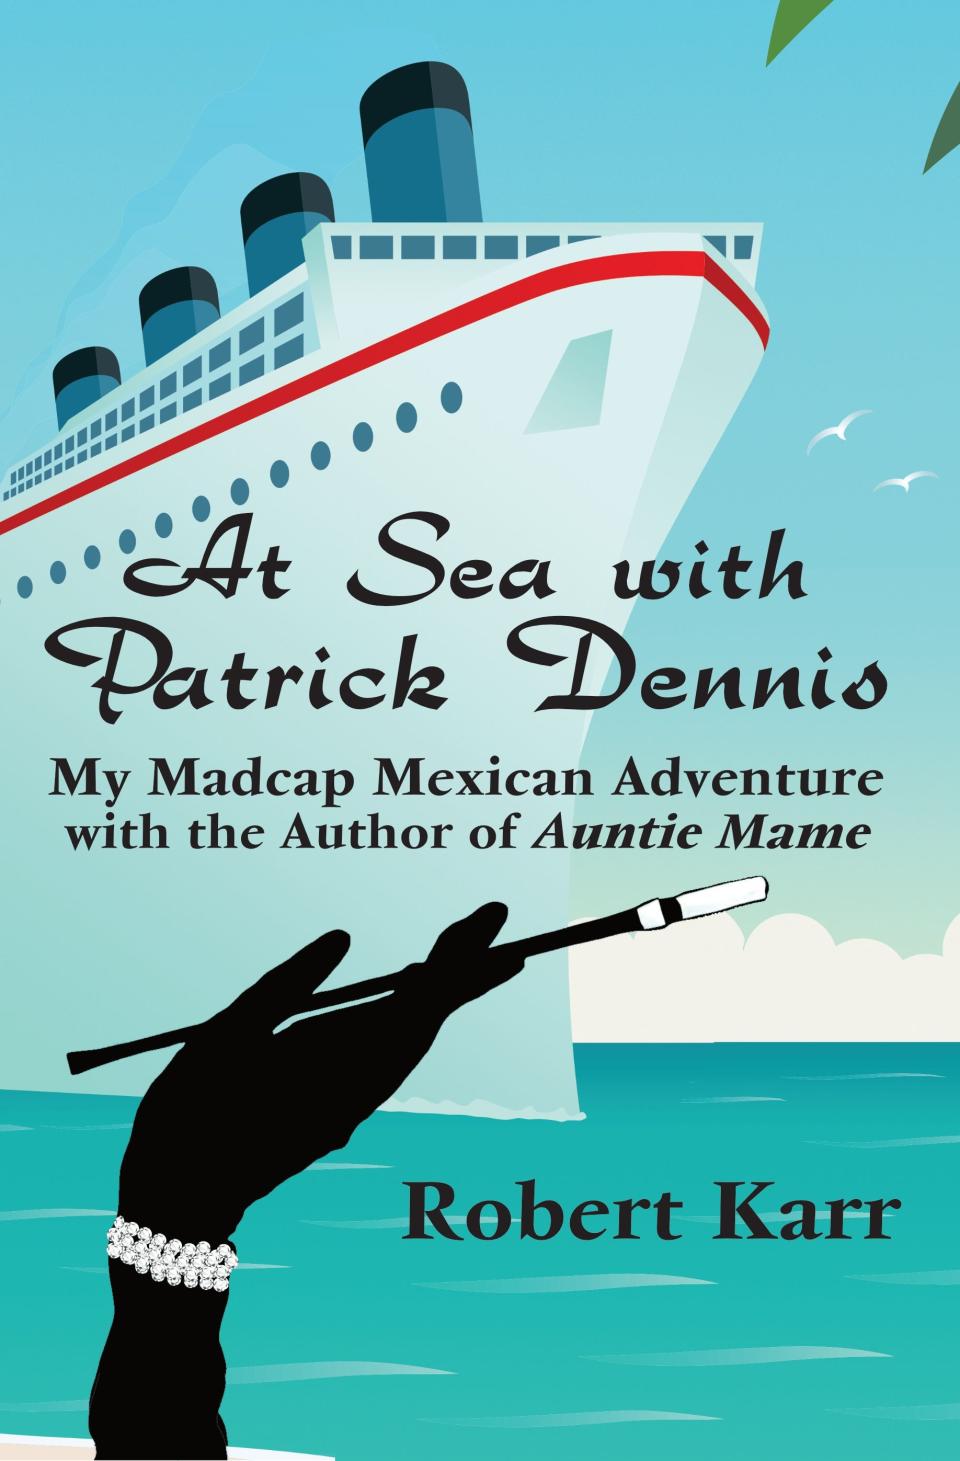 "At Sea with Patrick Dennis" is available for purchase on Amazon starting May 18.